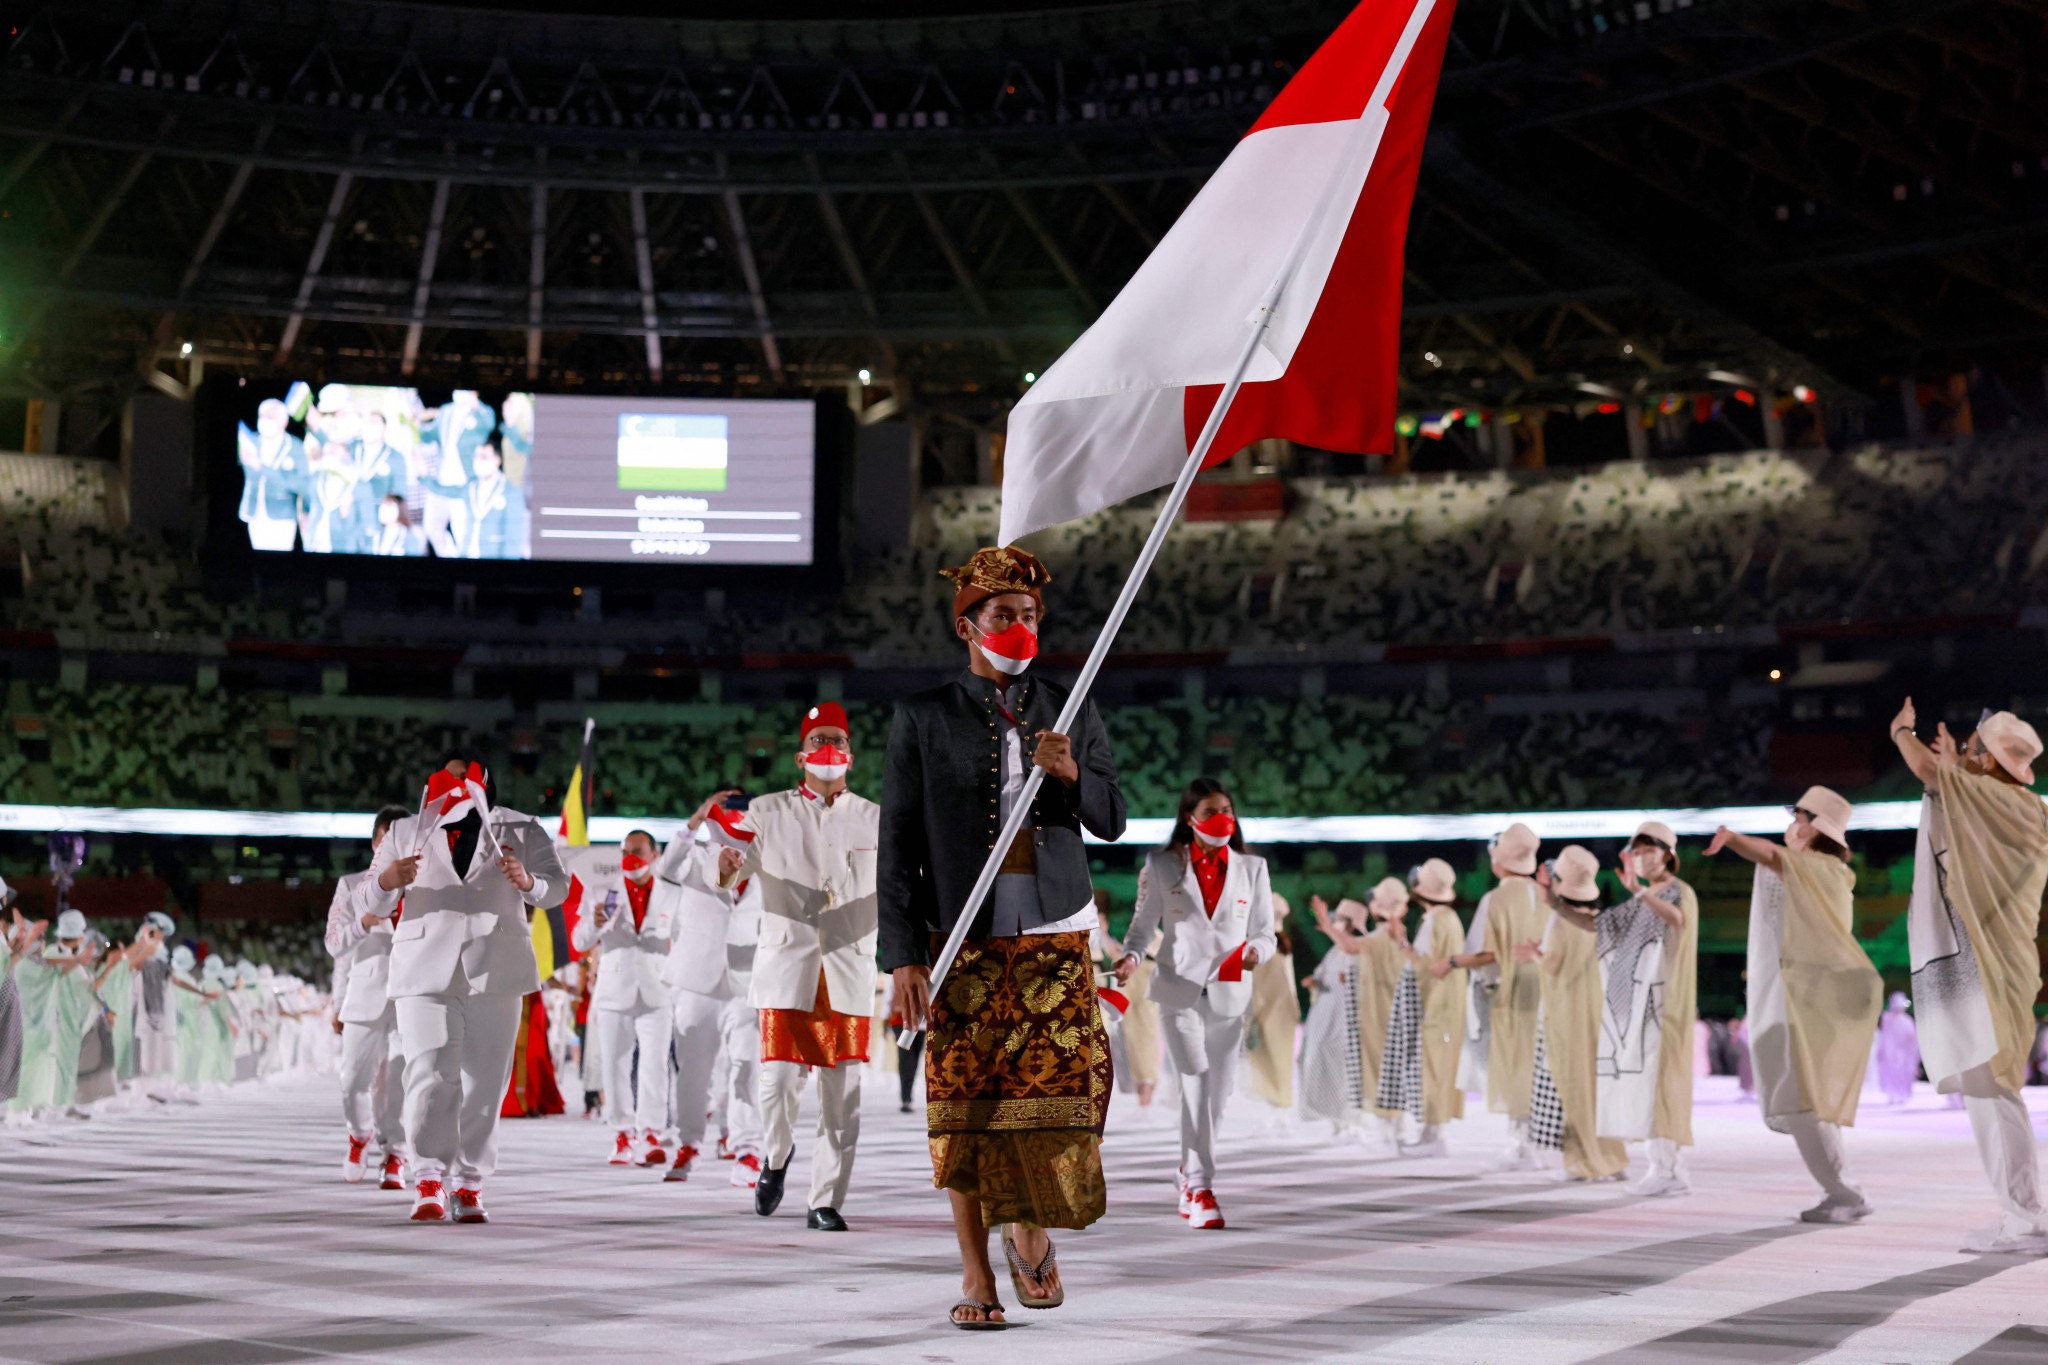 The Indonesian Olympic Committee wants Paris 2024 qualification prioritised over the Asian Games ©Getty Images